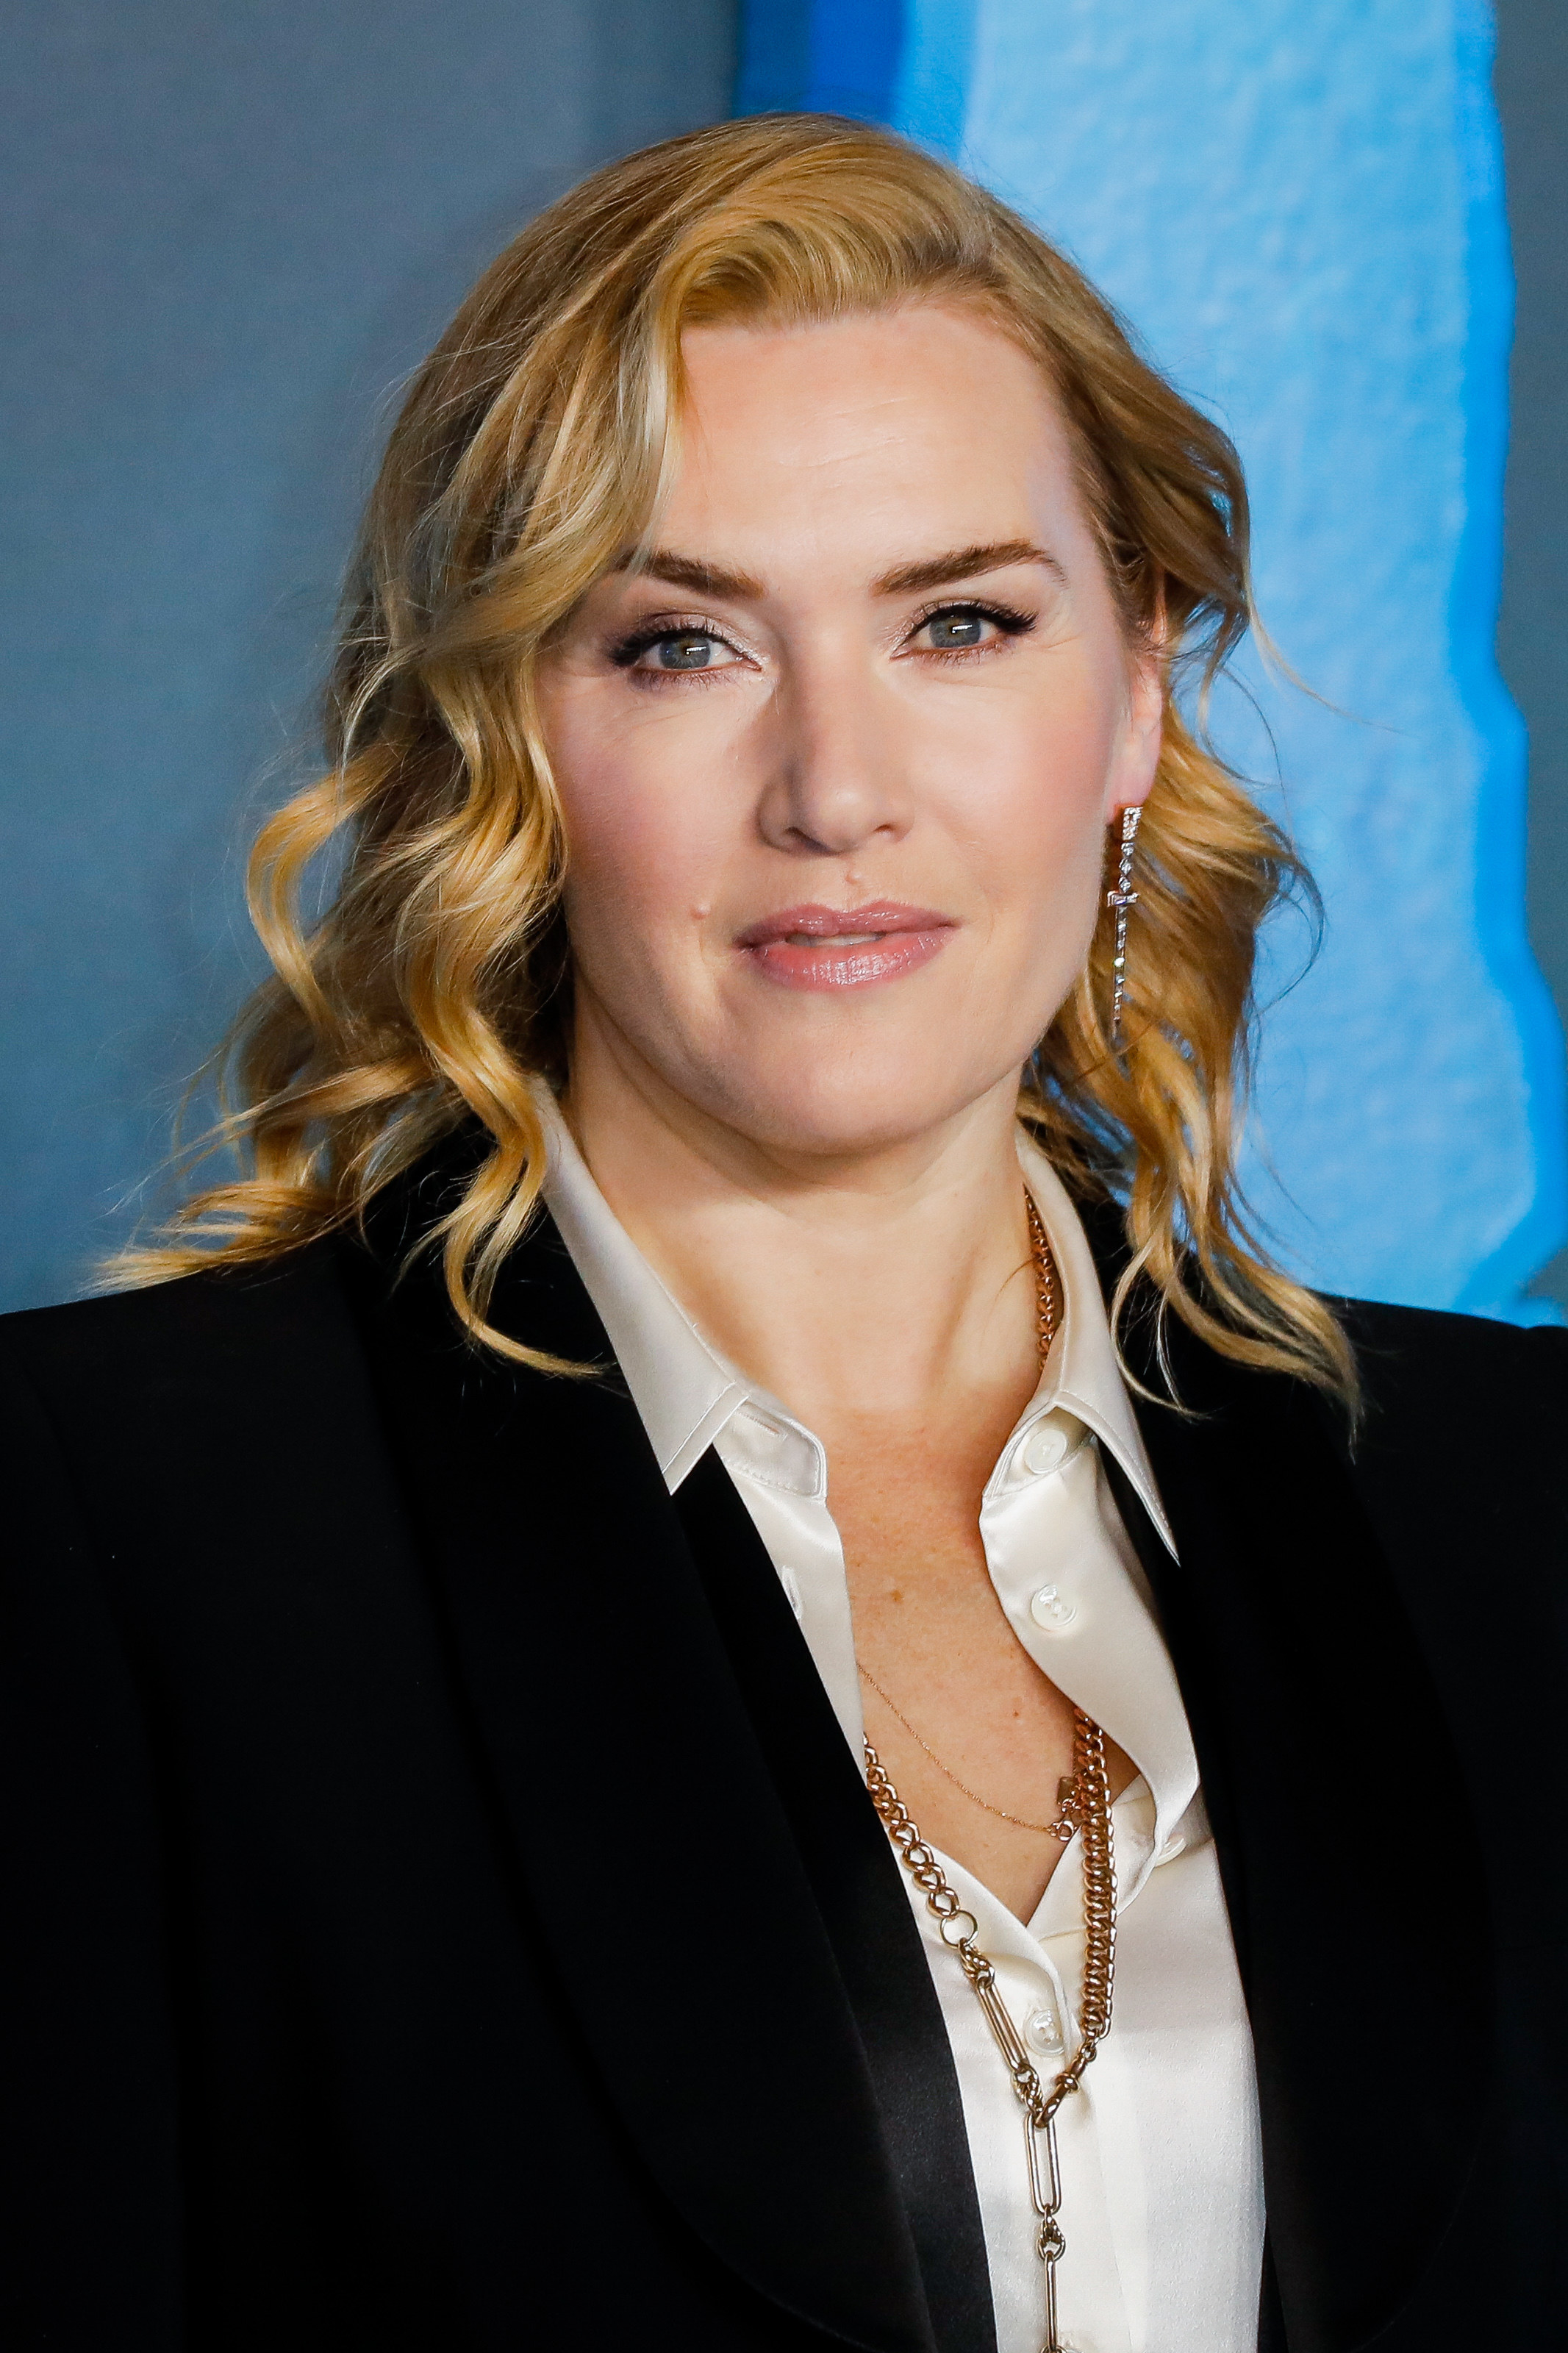 Kate Winslet's Agent To Be About Weight